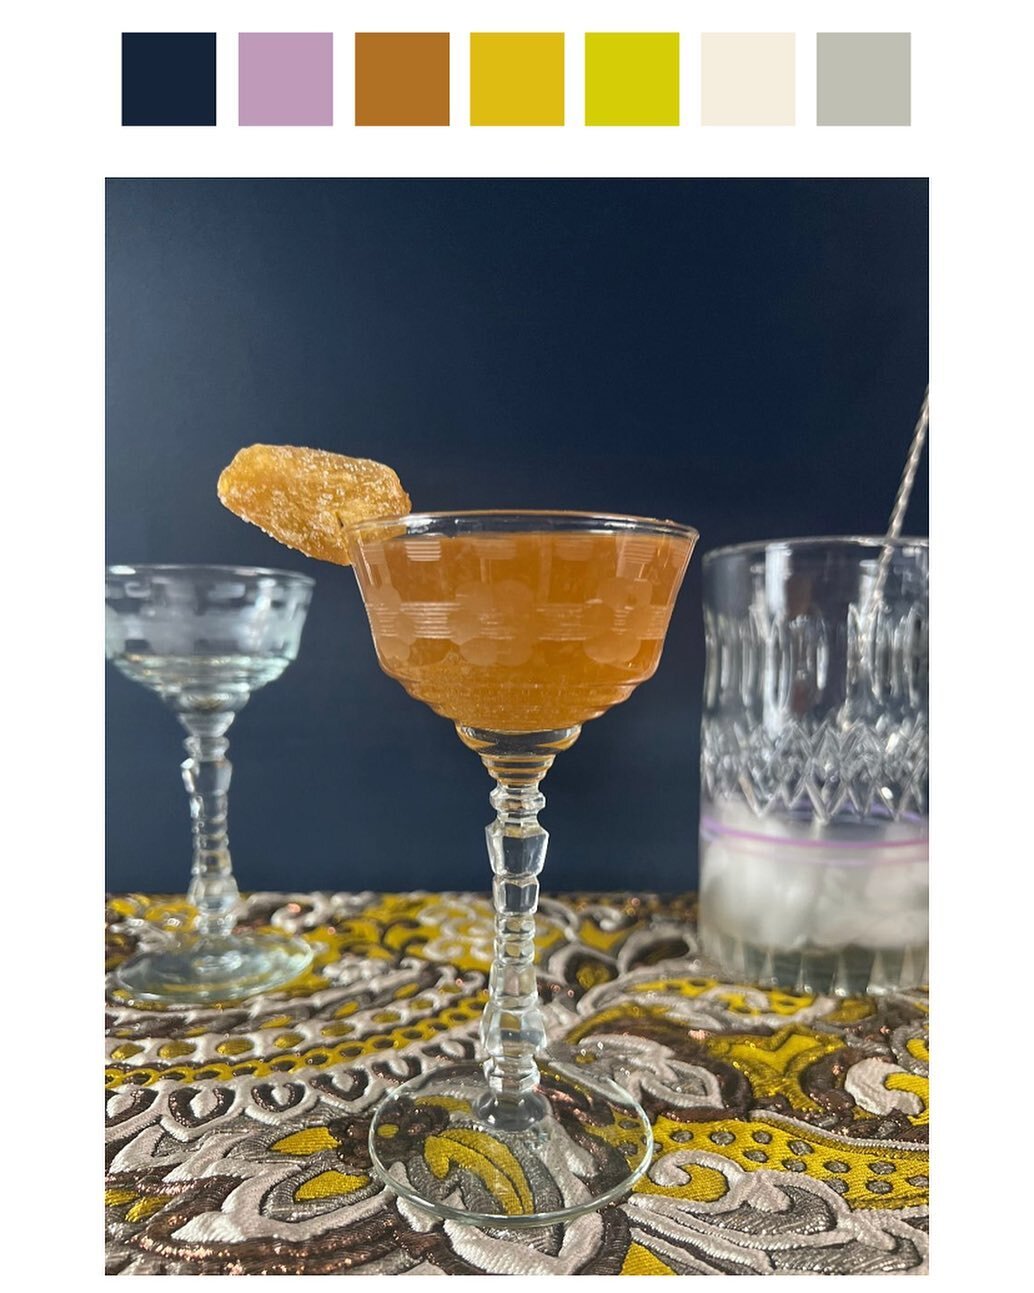 The recipe for this delicious cocktail can be found in @the_taste_curators latest monthly newsletter. We also look at a new favorite restaurant in NYC, a store carrying the best pantry items and new colors happening in pottery.  Sign up in the link i